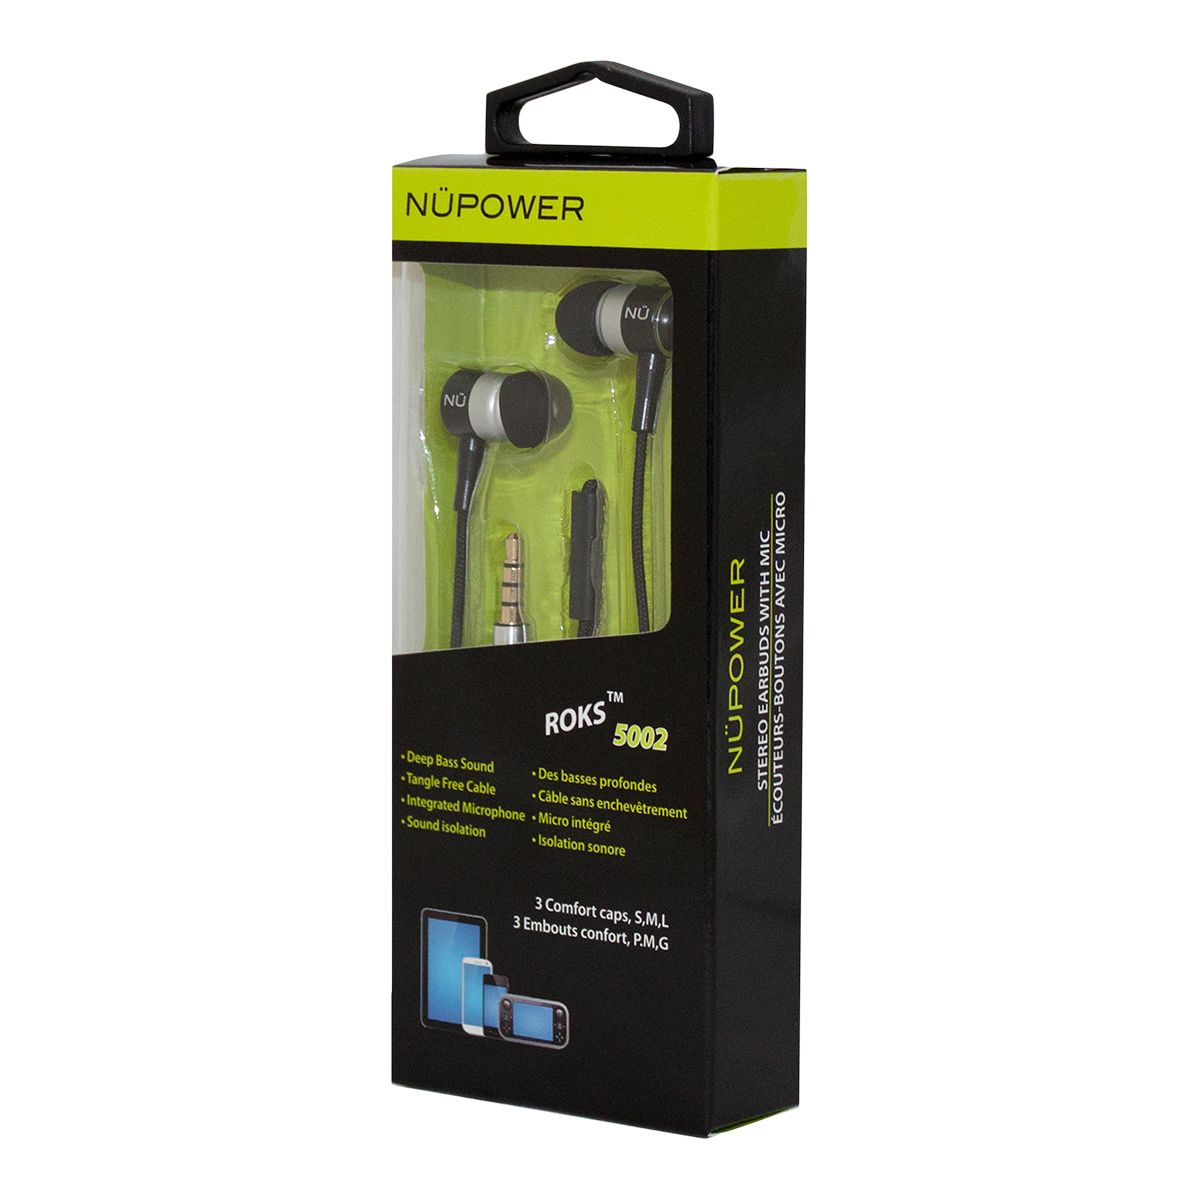 NuPower 3.5 mm Android/iOS Stereo Earbuds with Mic